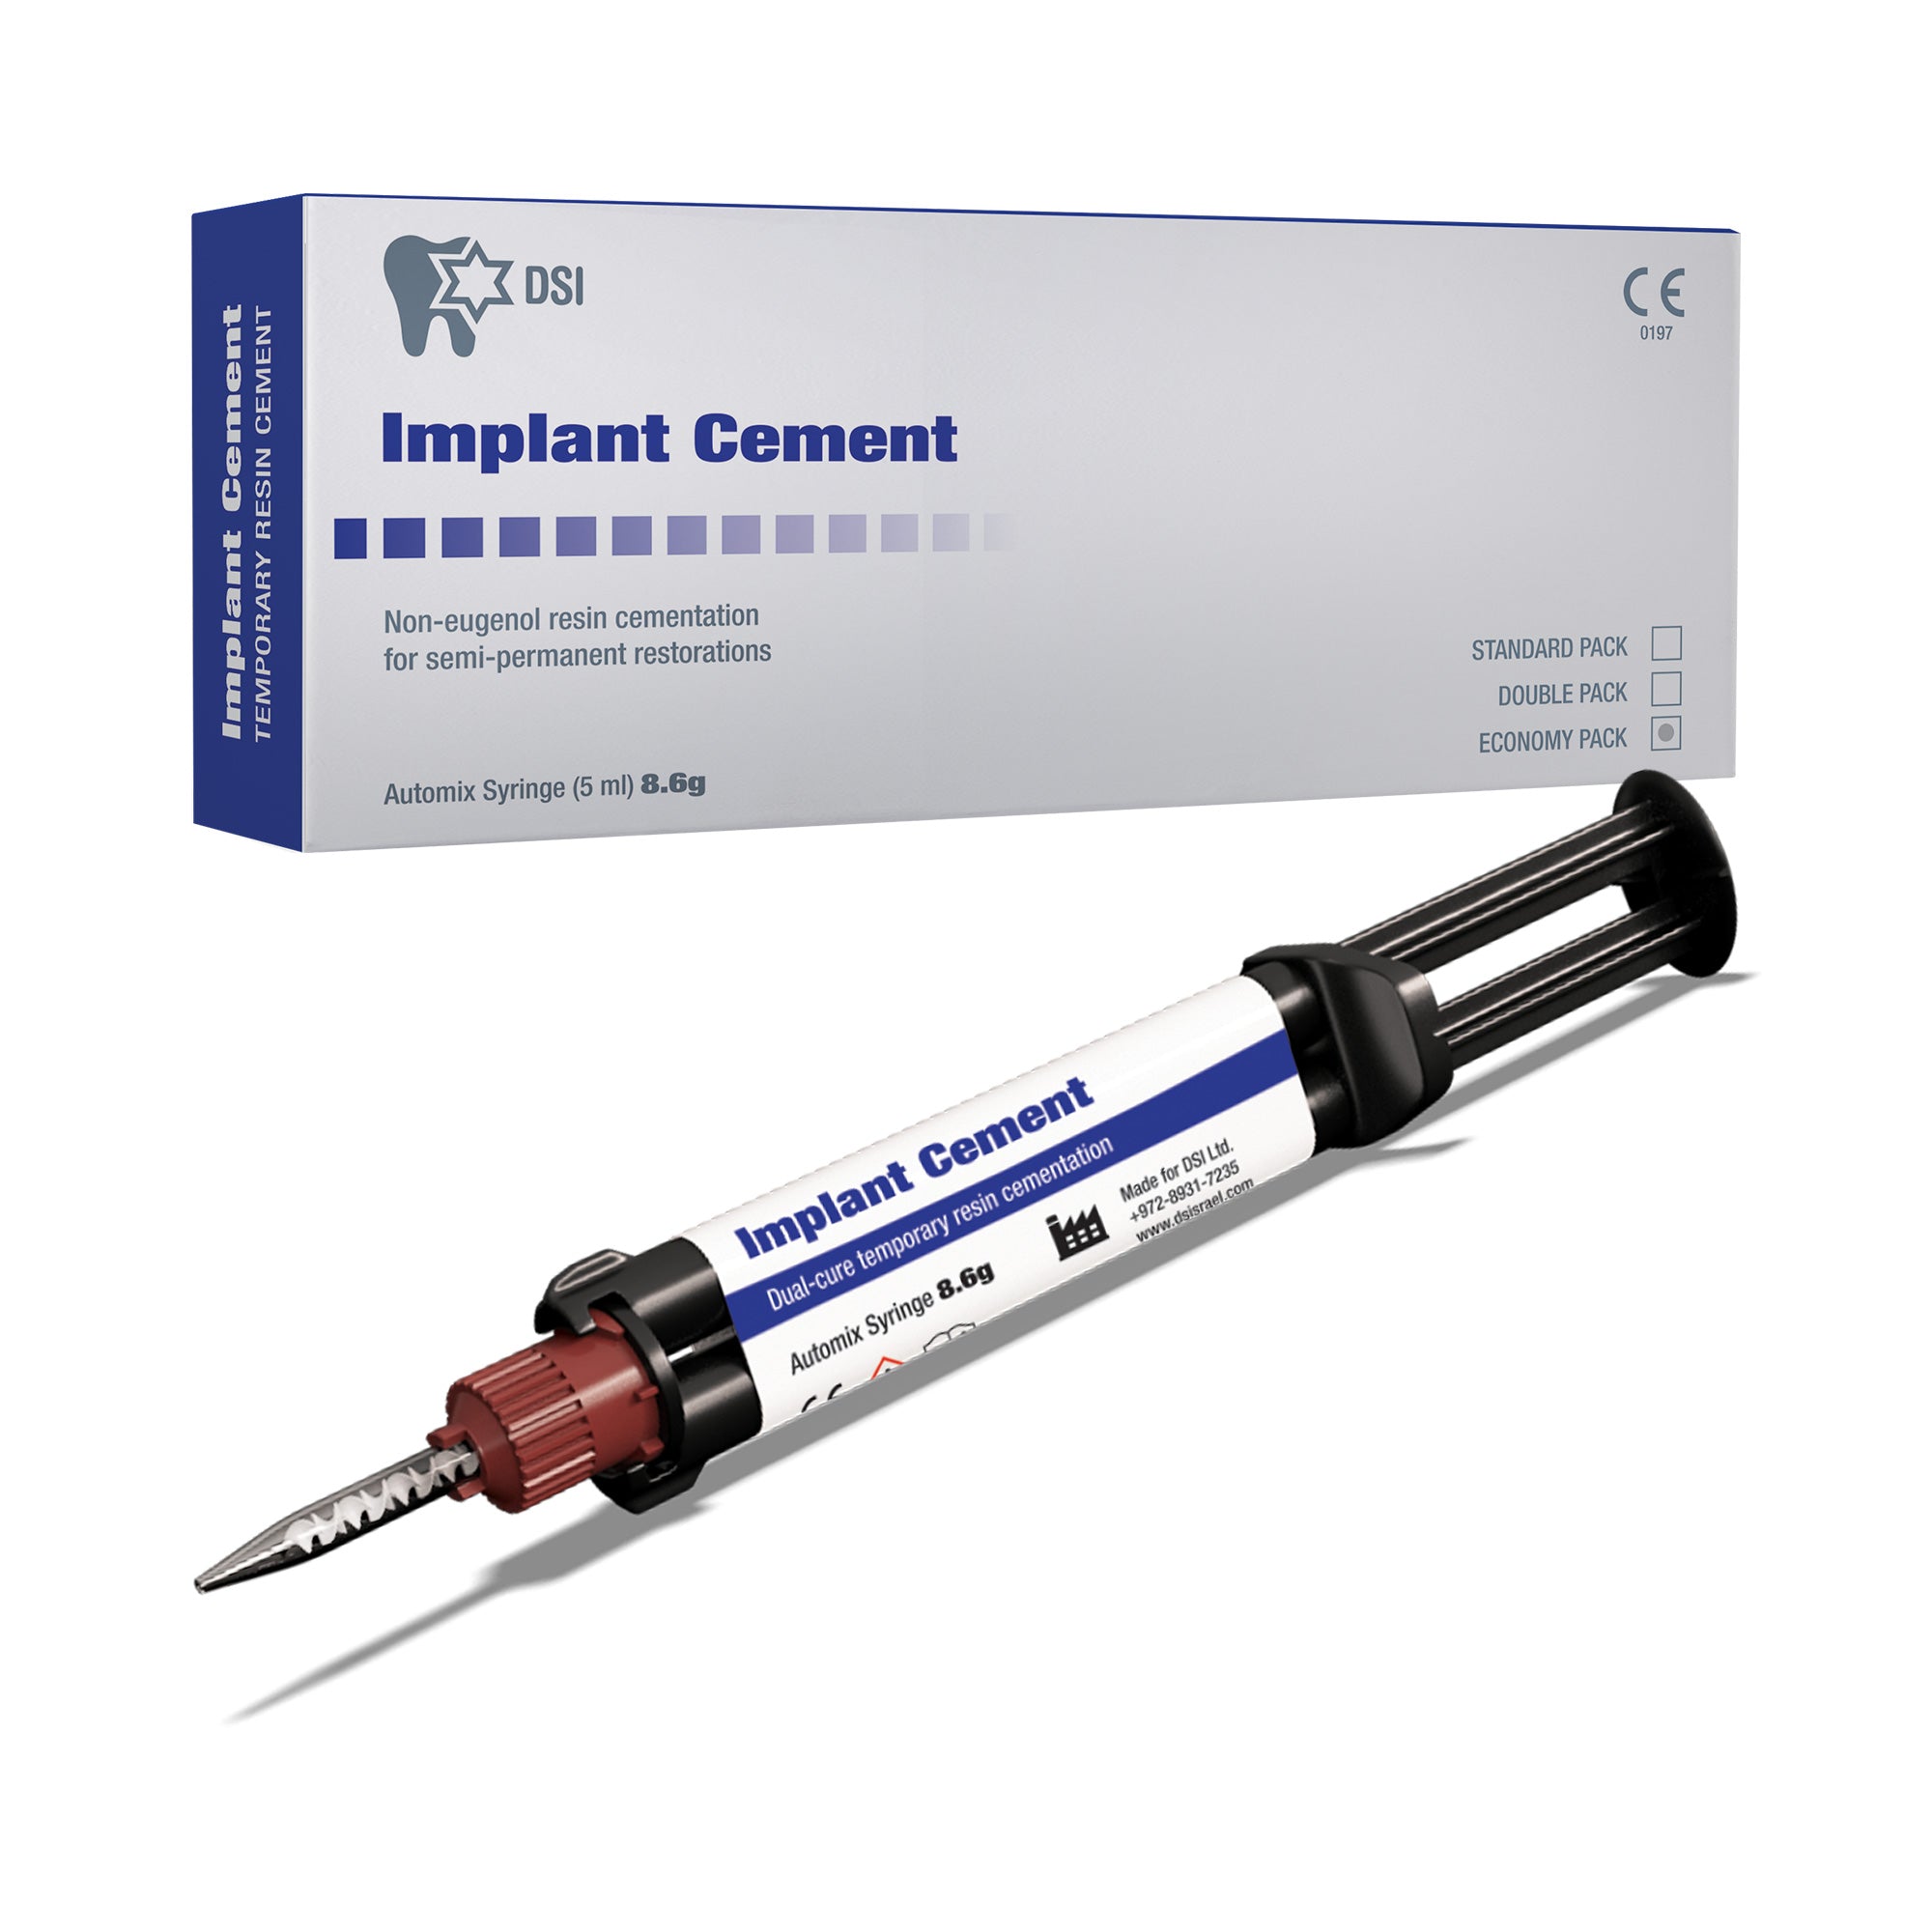 DSI Semi-Permament Implant Cement For Crowns 8.6g Automix Syringe